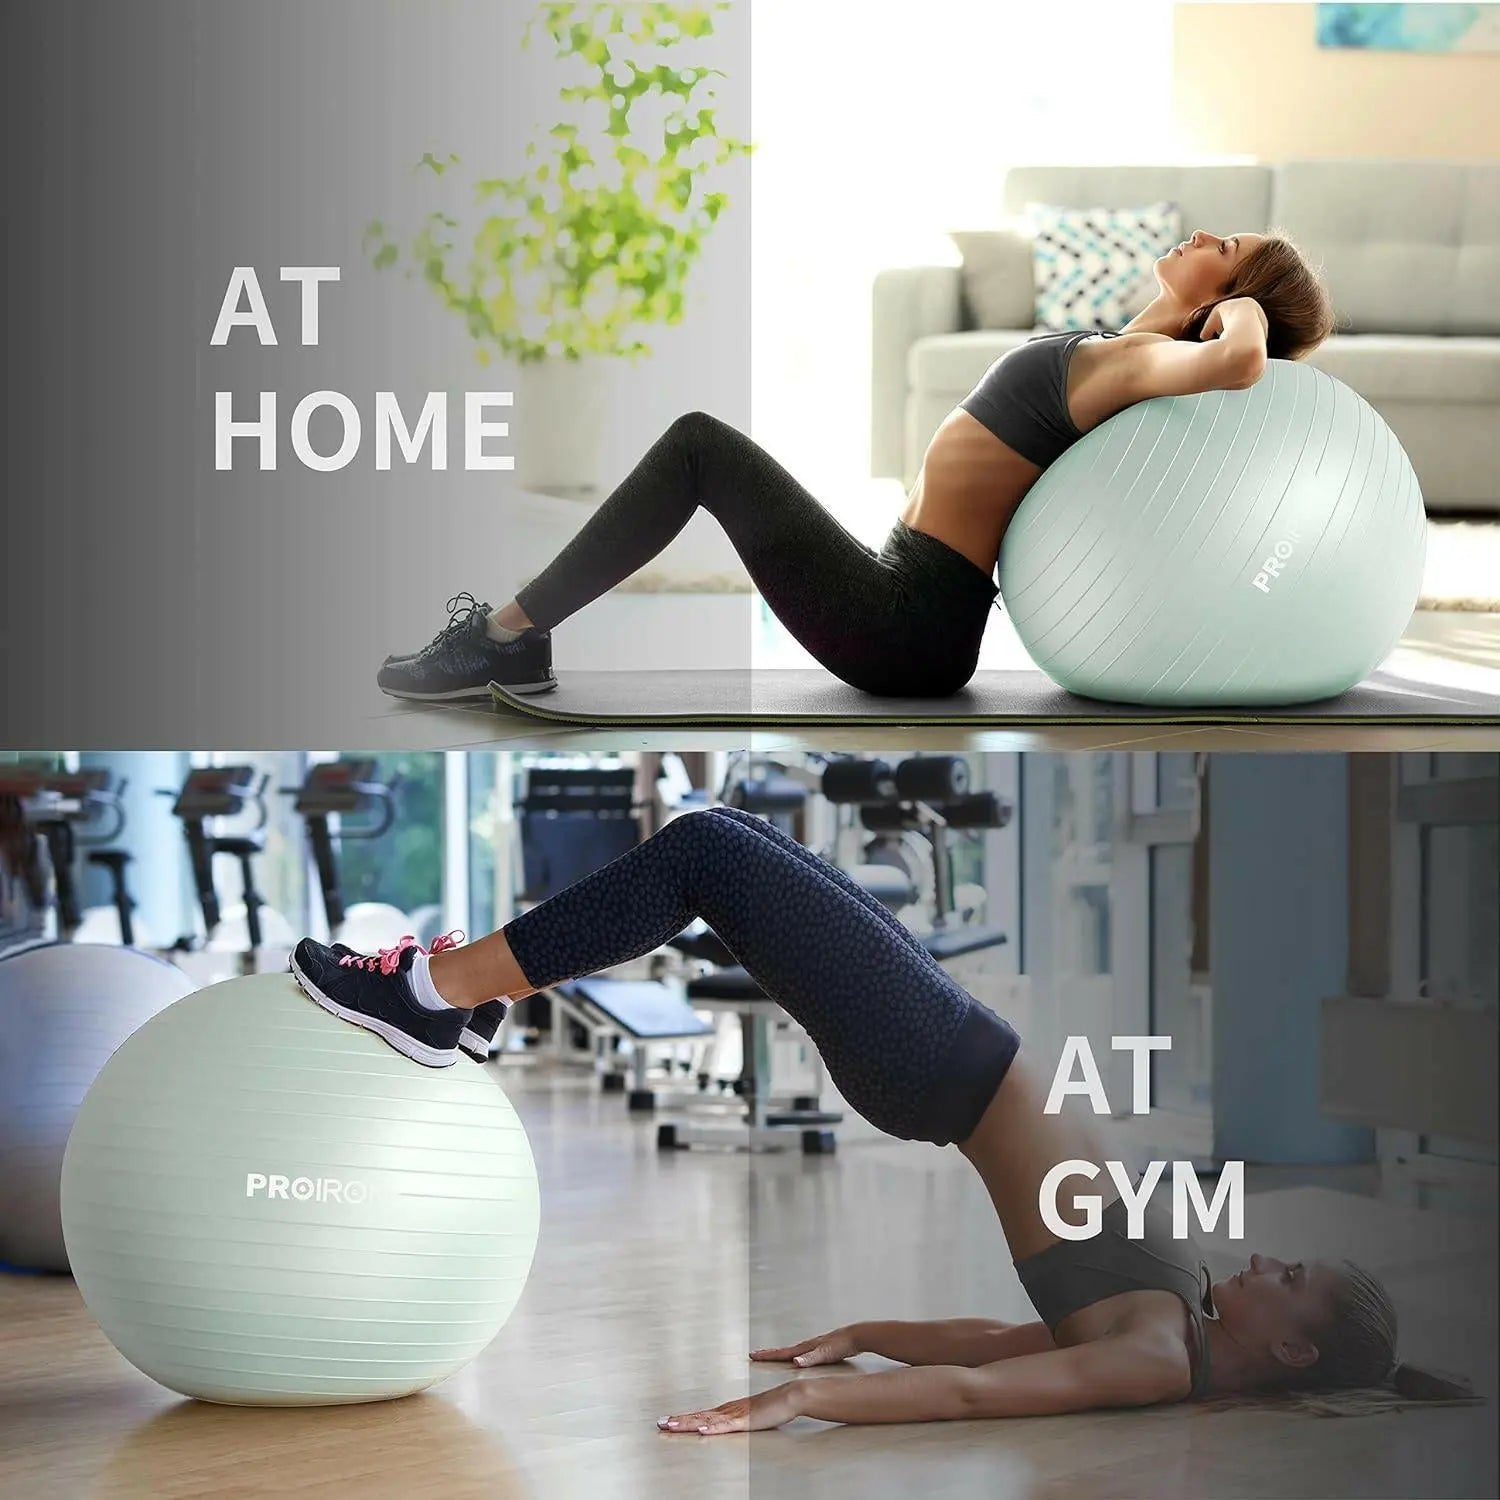 PROIRON Yoga Ball Anti-Burst Exercise Ball Chair with Quick Pump Slip Resistant Gym Ball Supports 500KG Balance Ball for Pilates Yoga Birthing